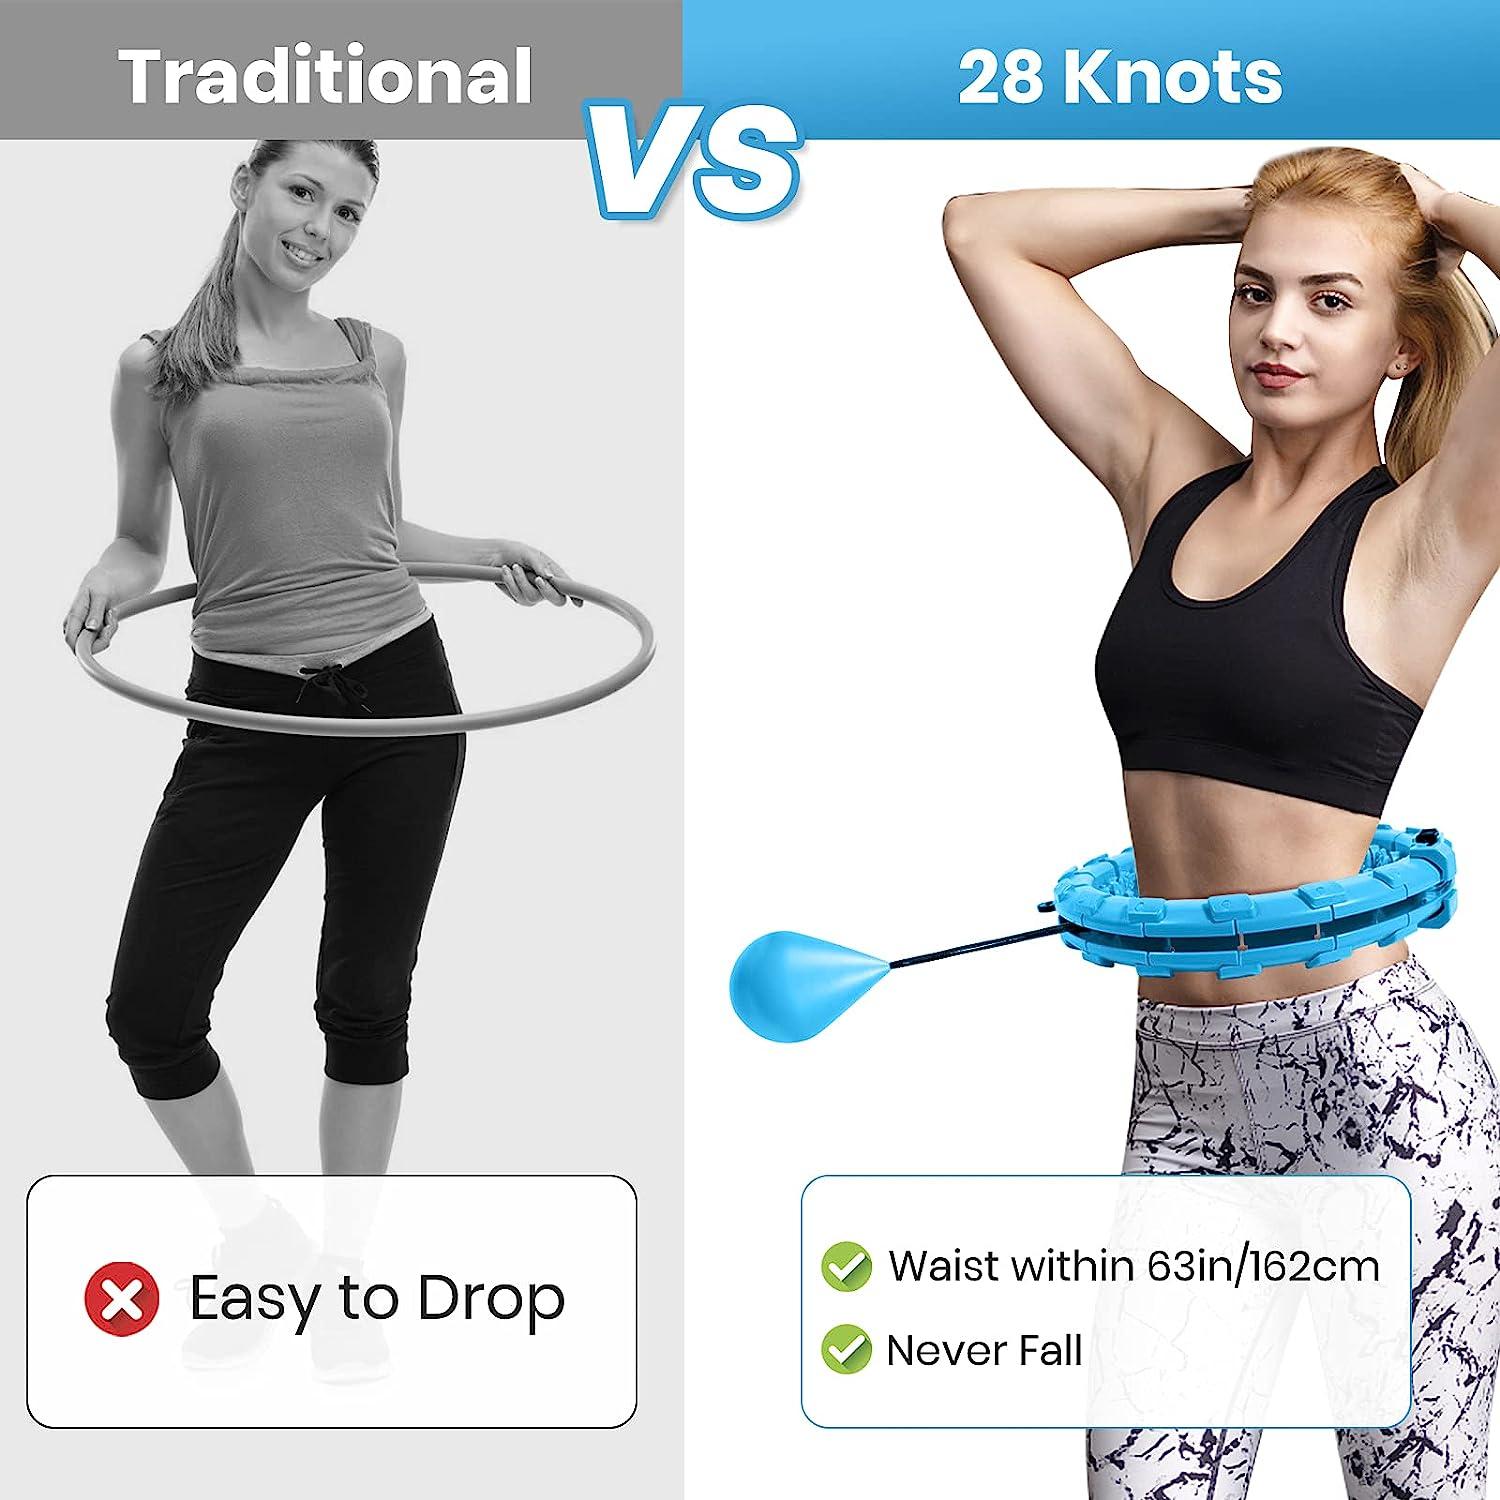 Weighted Hula Hoop Infinity Hoop for Adult Weight Loss,Fithoop with  Detachable Knots, Adjustable Smart Hula Hoops, 2 in 1 Abdomen Fitness  Message Non Fall Auto Spinning Ball Hoops Women Men Beginner S-blue